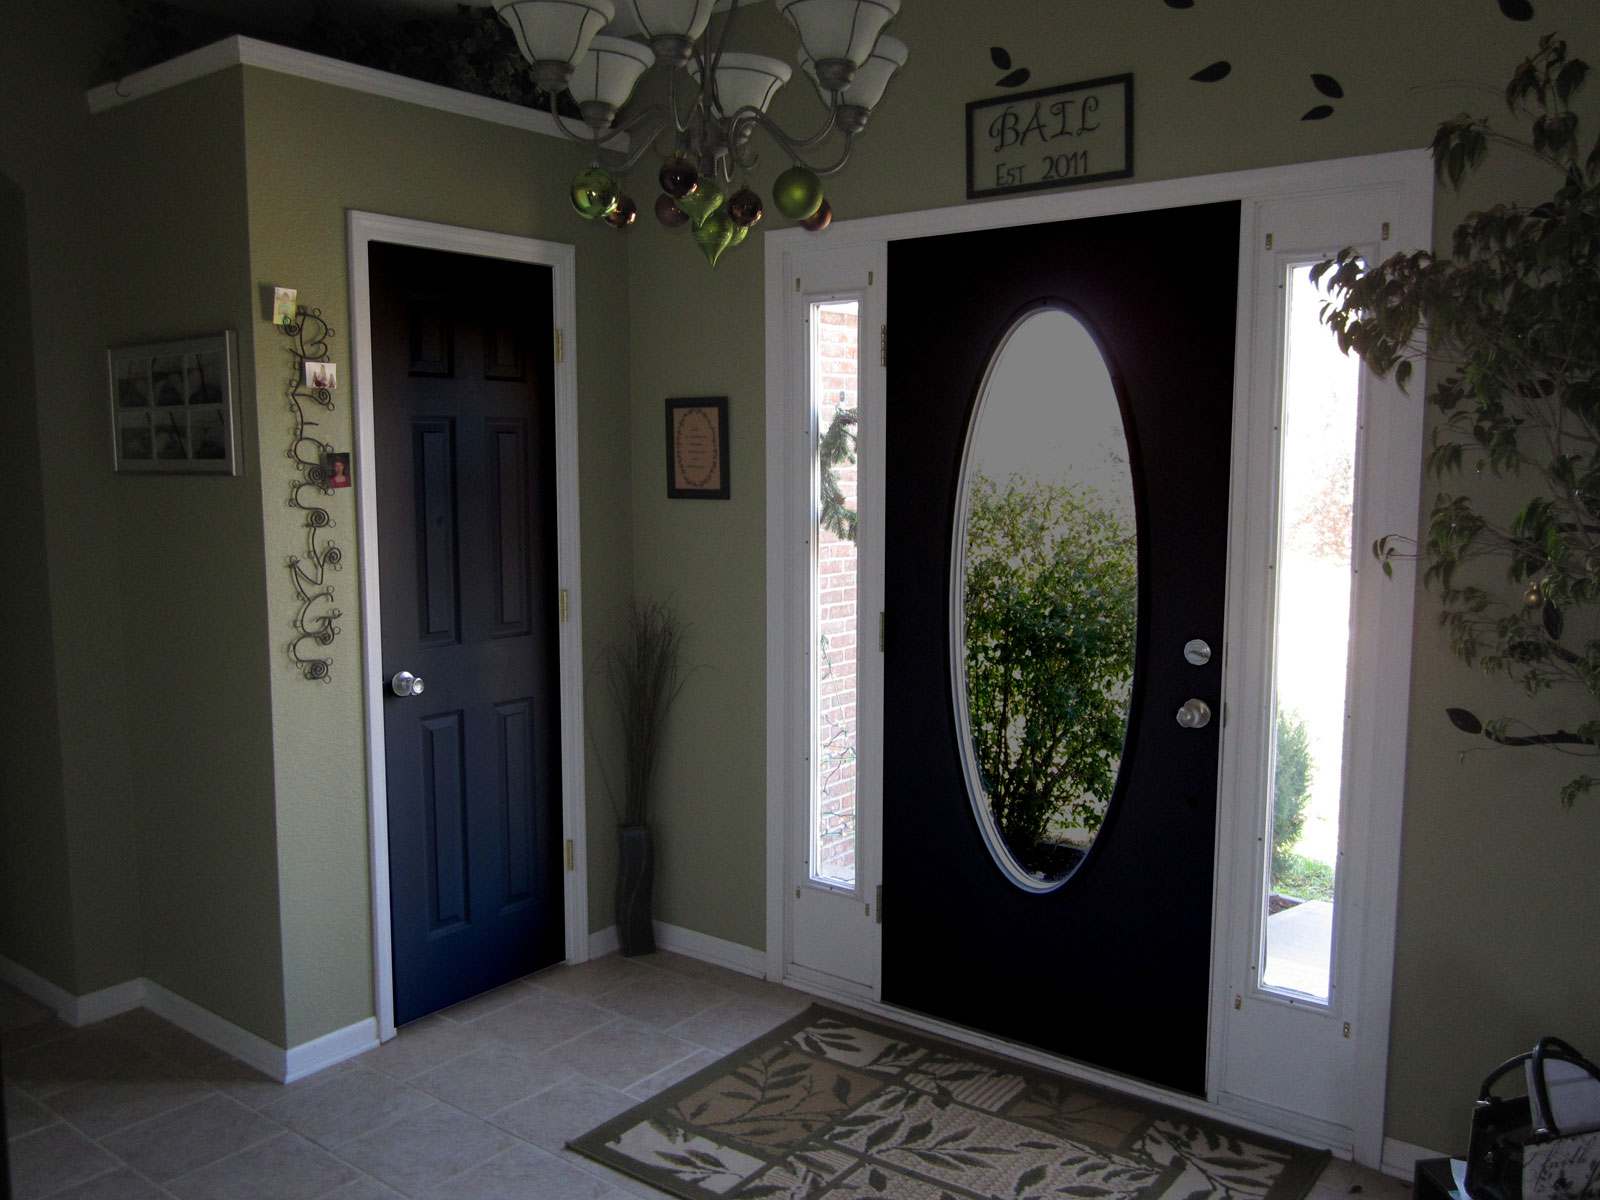 Black Interior Clear Exciting Black Interior Doors And Clear Glass Screen In Entrance Completed With Rug And Wall Decorations Also Furnished With Antique Chandelier Interior Design Black Interior Doors And Its Elegant Appearance